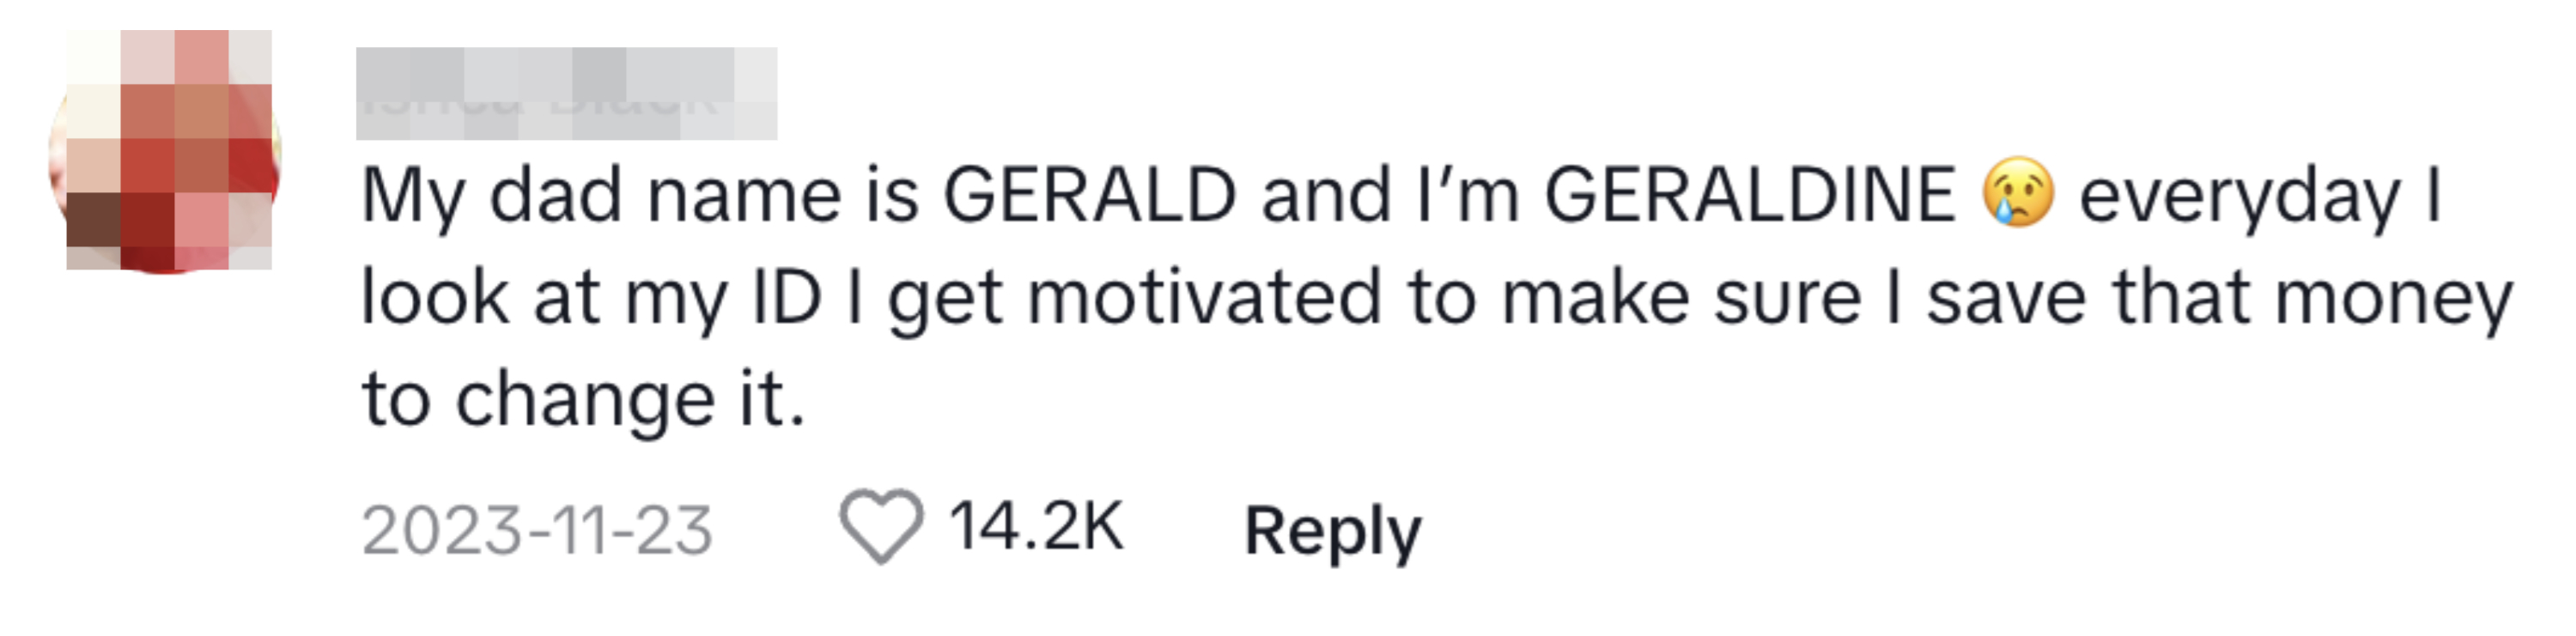 Comment: &quot;My dad&#x27;s name is Gerald and I&#x27;m GERALDINE. Everyday I look at my ID I get motivated to make sure I save that money to change it&quot;